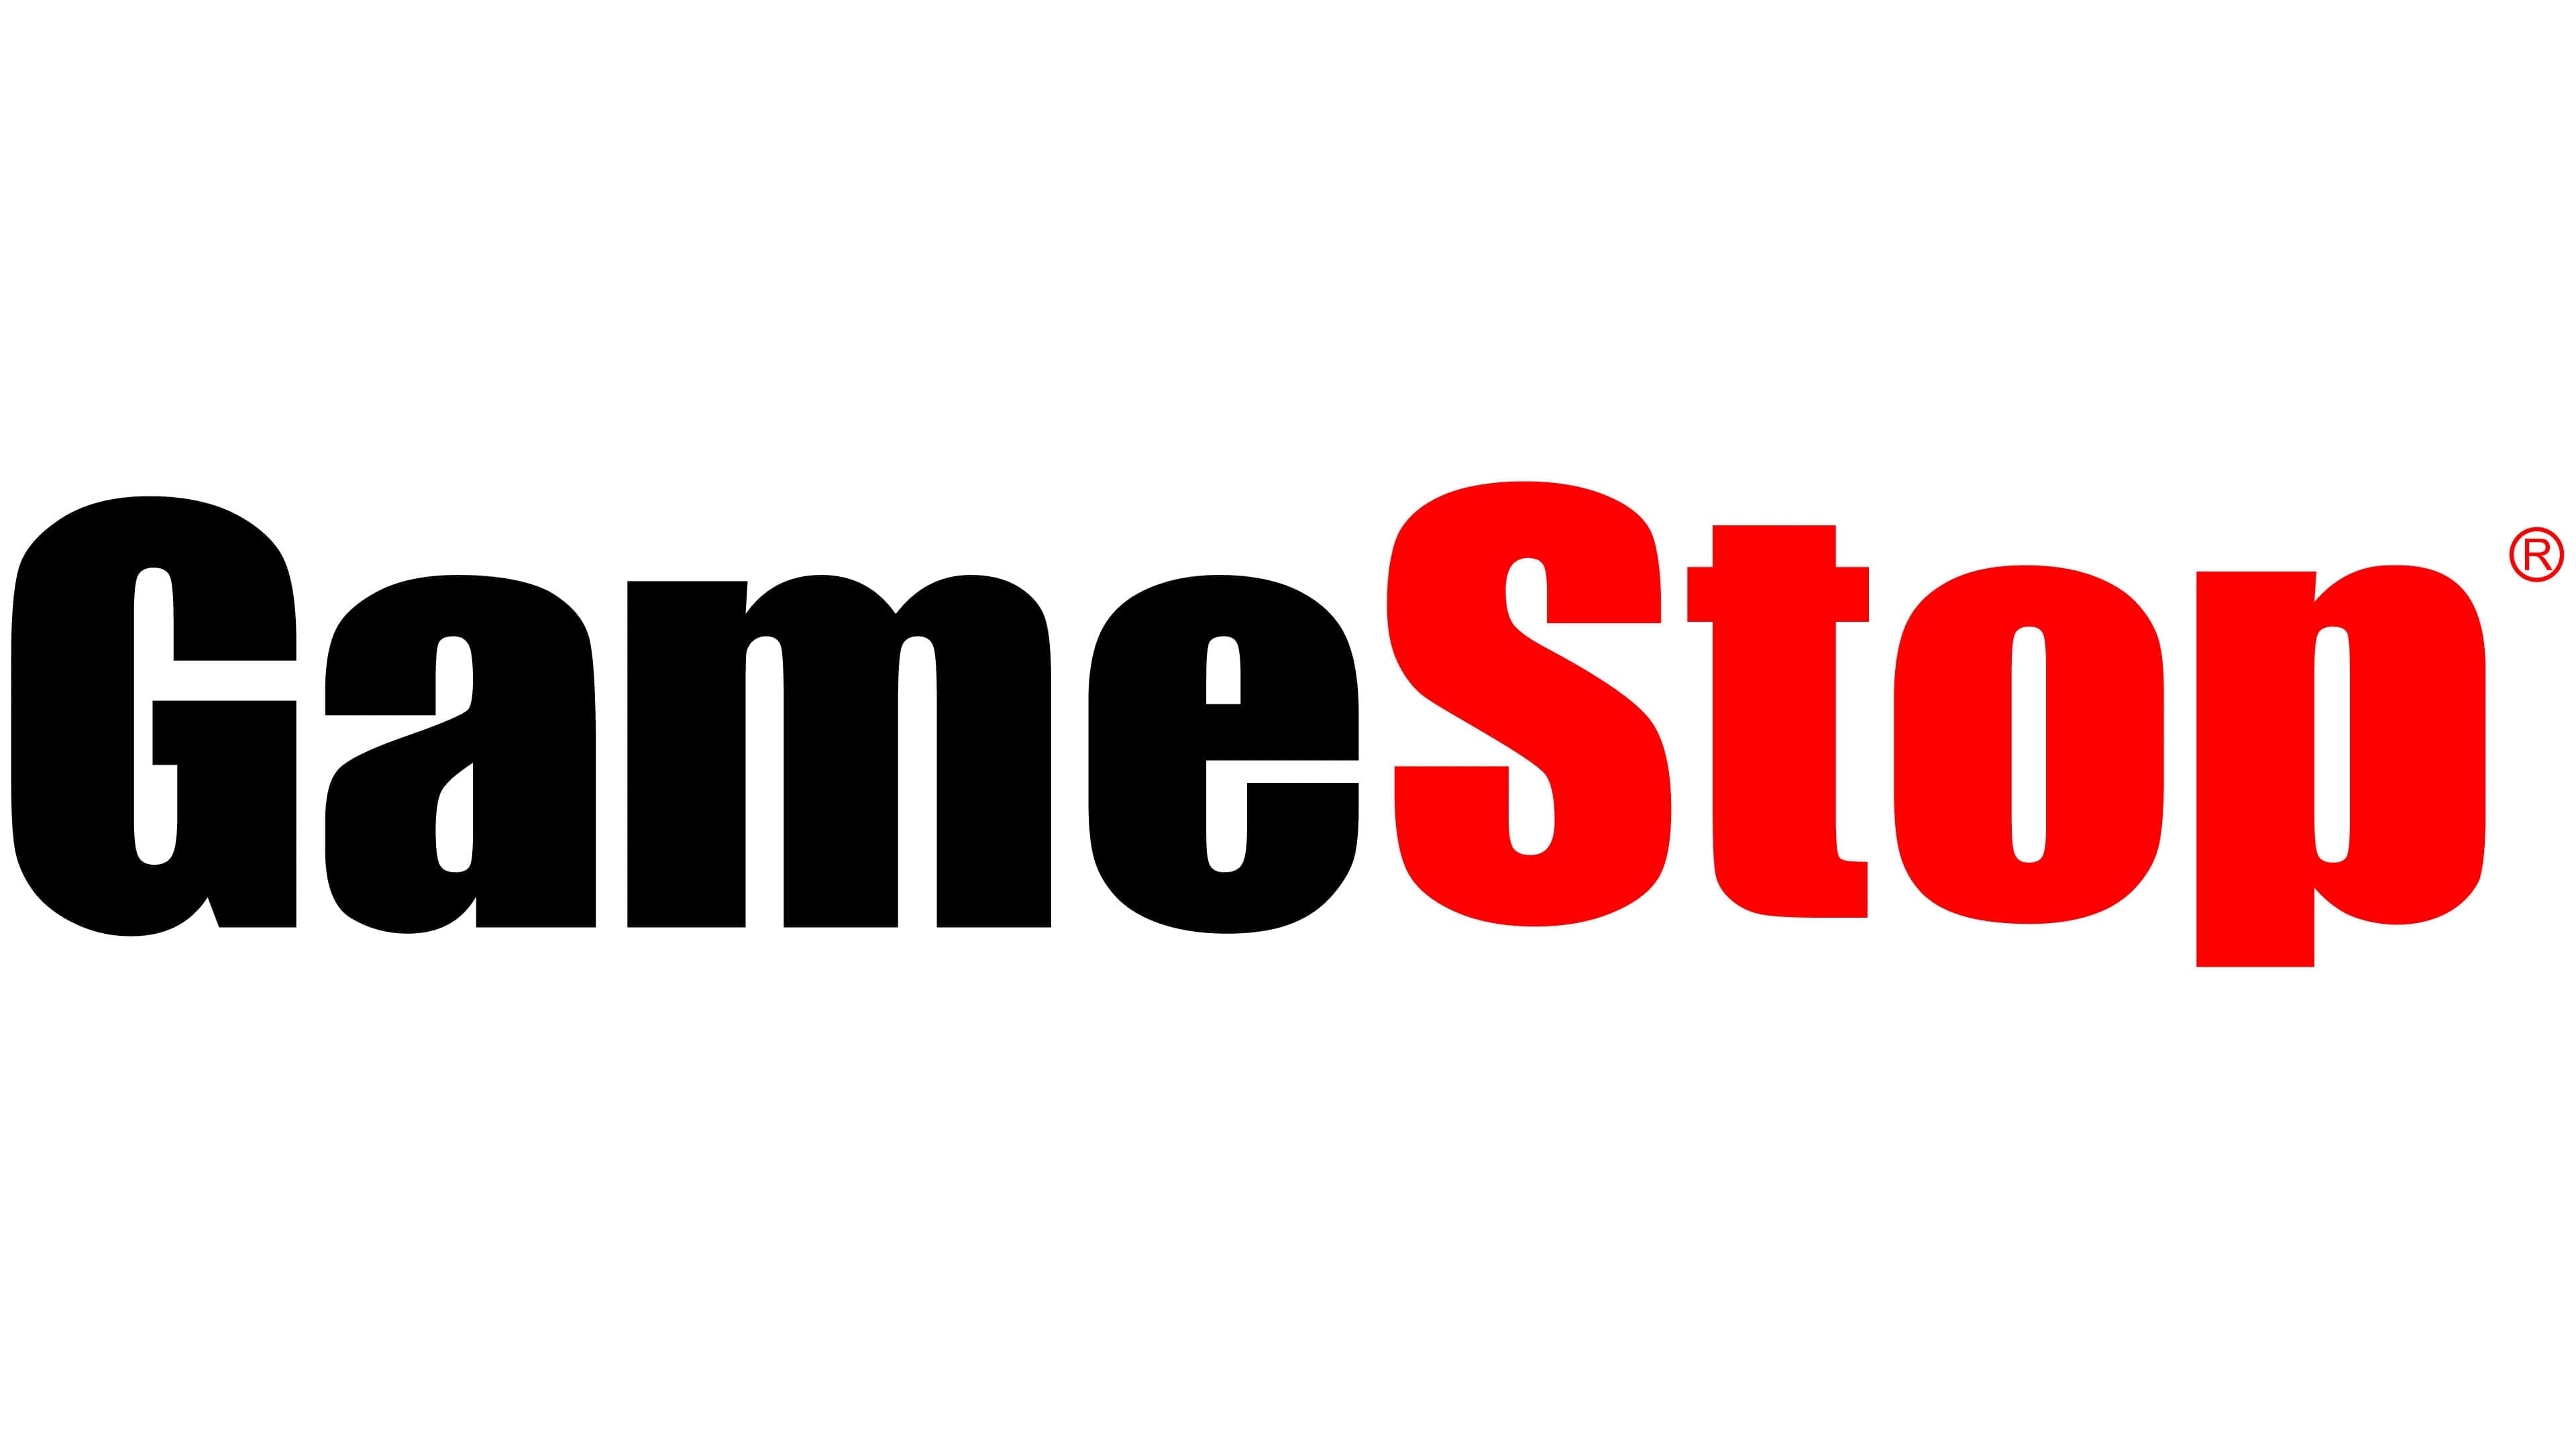 4/$40 On $19.99 And Under Pre-owned Games And 4/$10 On $4.99 And Under Pre-owned Games @ Gamestop - IN STORE ONLY